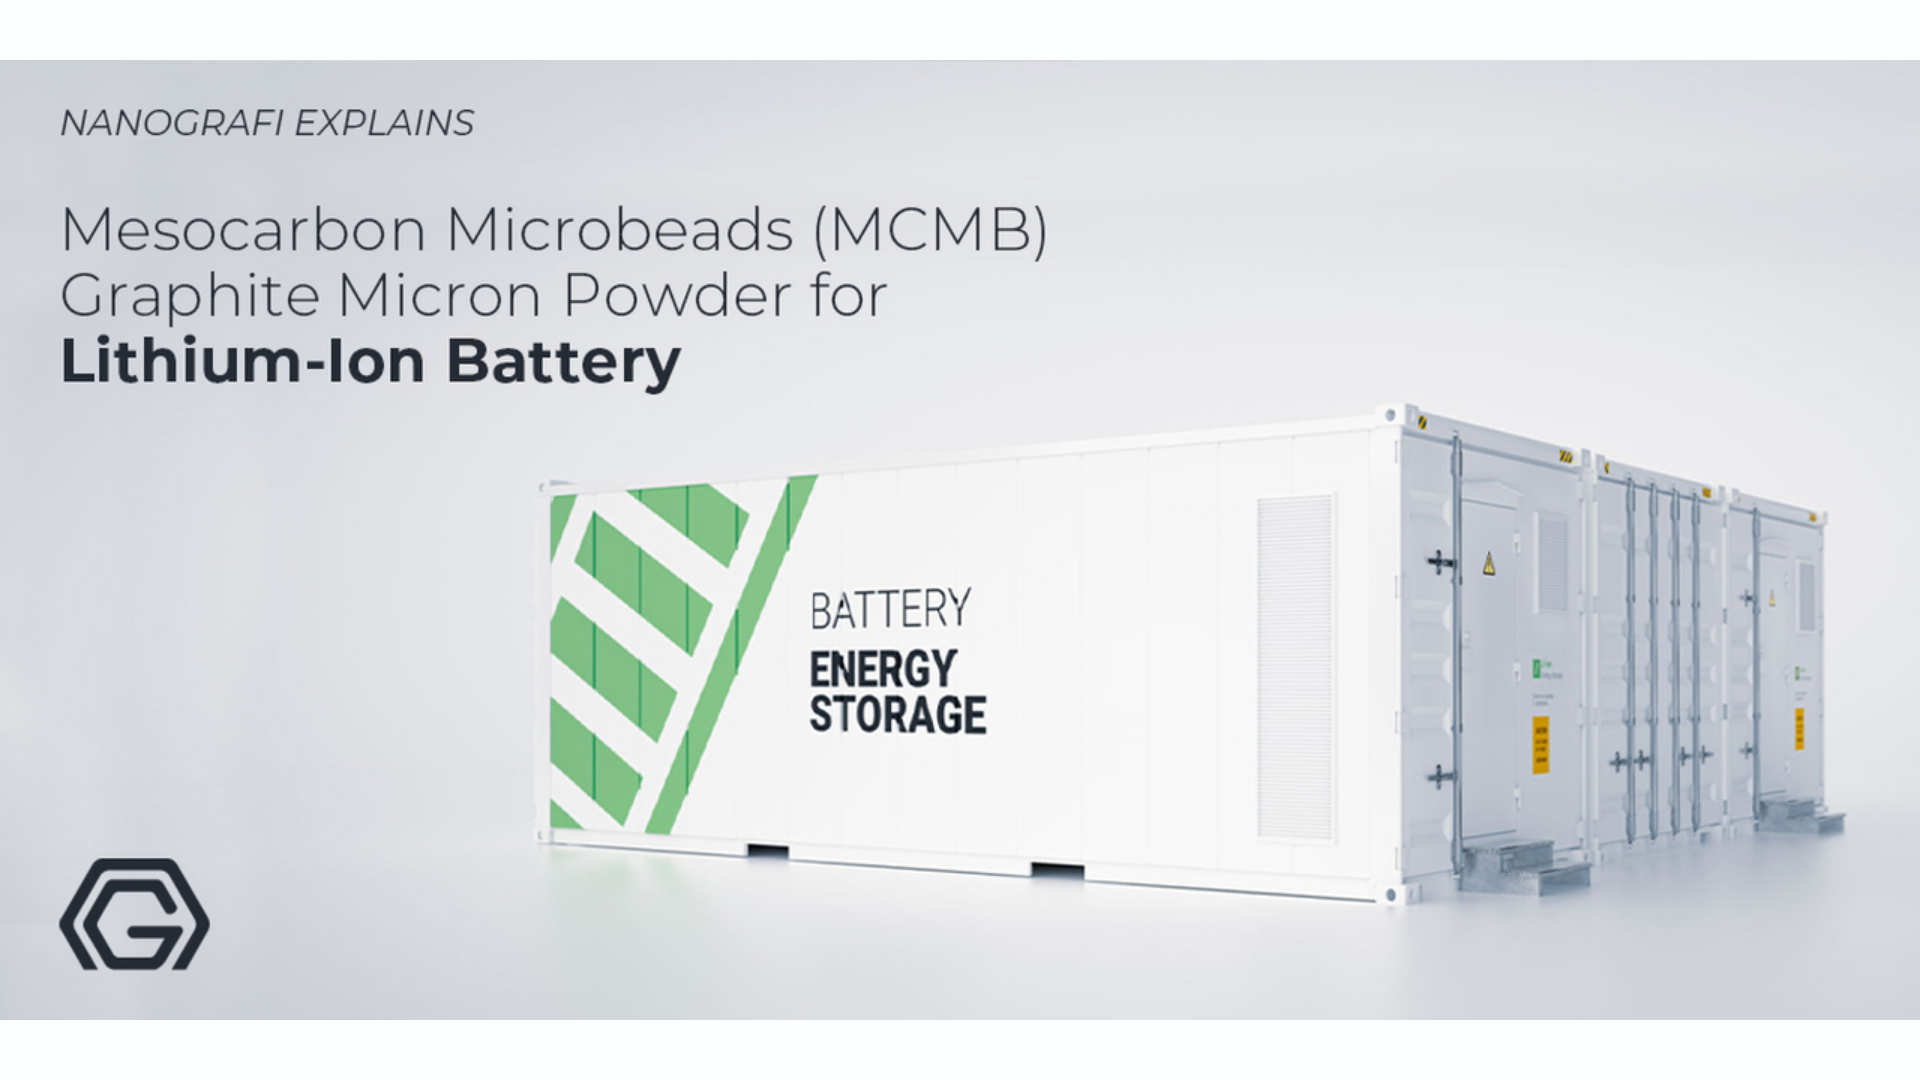 MCMB Lithium-Ion Battery